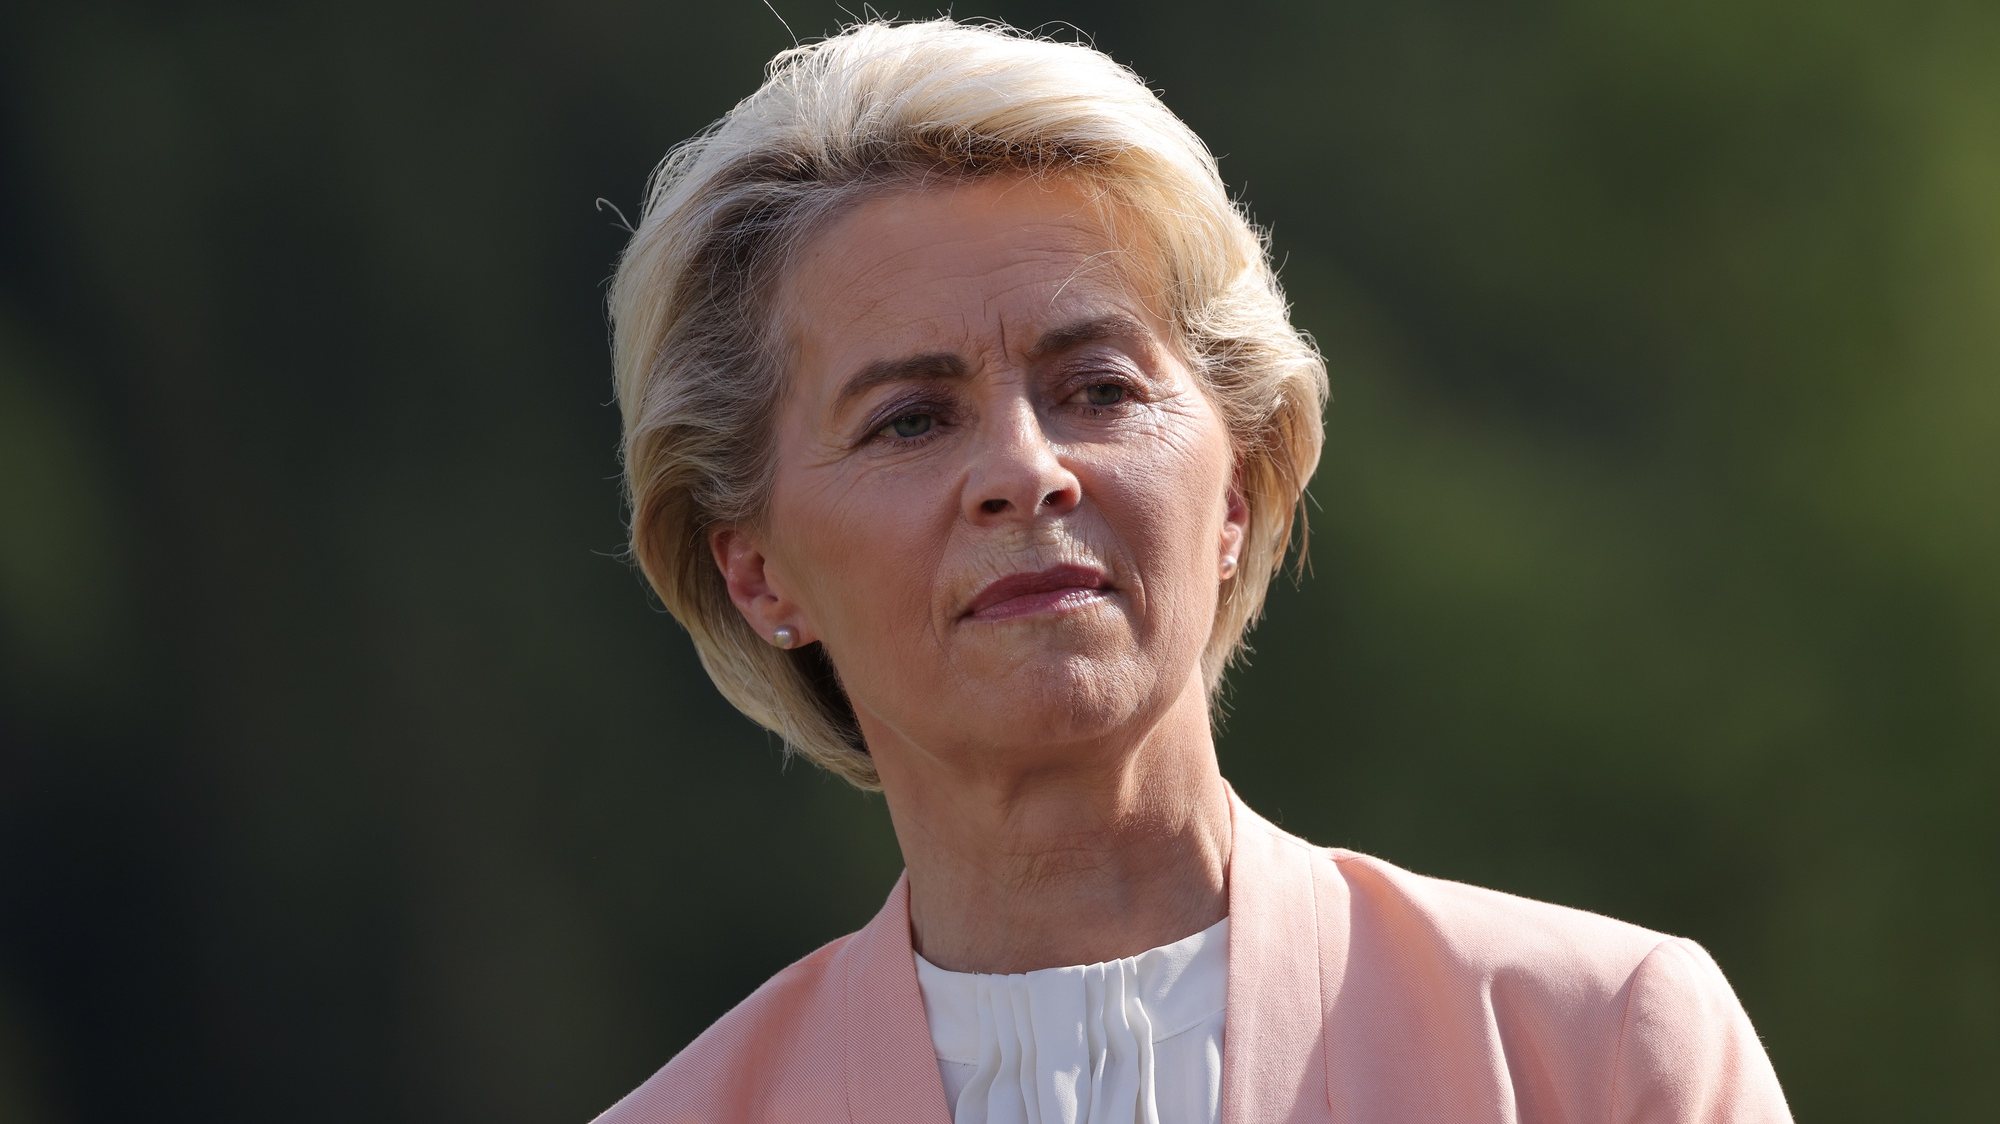 epa10035581 European Union Commission President Ursula von der Leyen listens to colleagues speaking at the &#039;Global Infrastructure&#039; side event during the G7 summit at Schloss Elmau, near Garmisch-Partenkirchen, Germany, 26 June 2022. Leaders of the G7 group of nations are officially coming together under the motto: &#039;progress towards an equitable world&#039; and will discuss global issues including war, climate change, hunger, poverty and health. Overshadowing this year&#039;s summit is the ongoing Russian war in Ukraine.  EPA/Sean Gallup / POOL